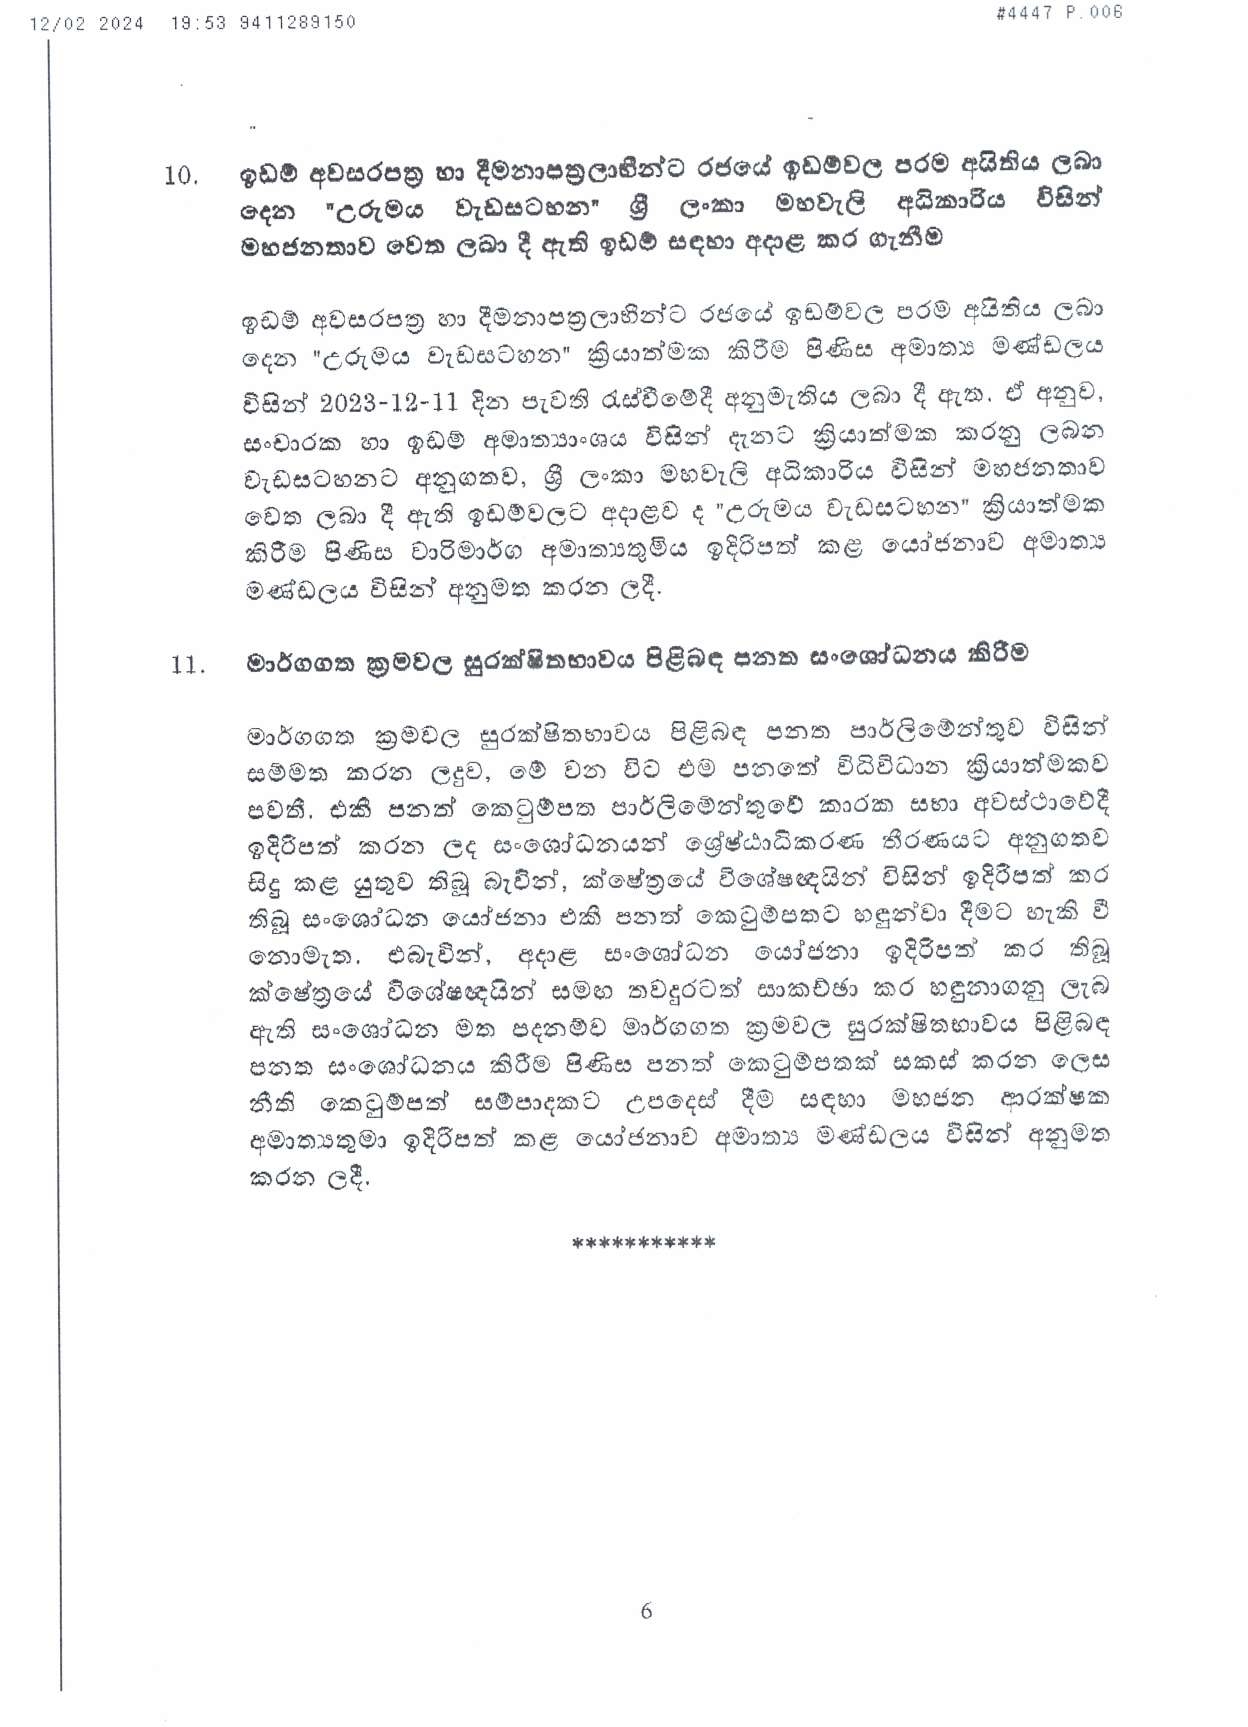 Cabient Decision on 12.02.2024 1 page 0006